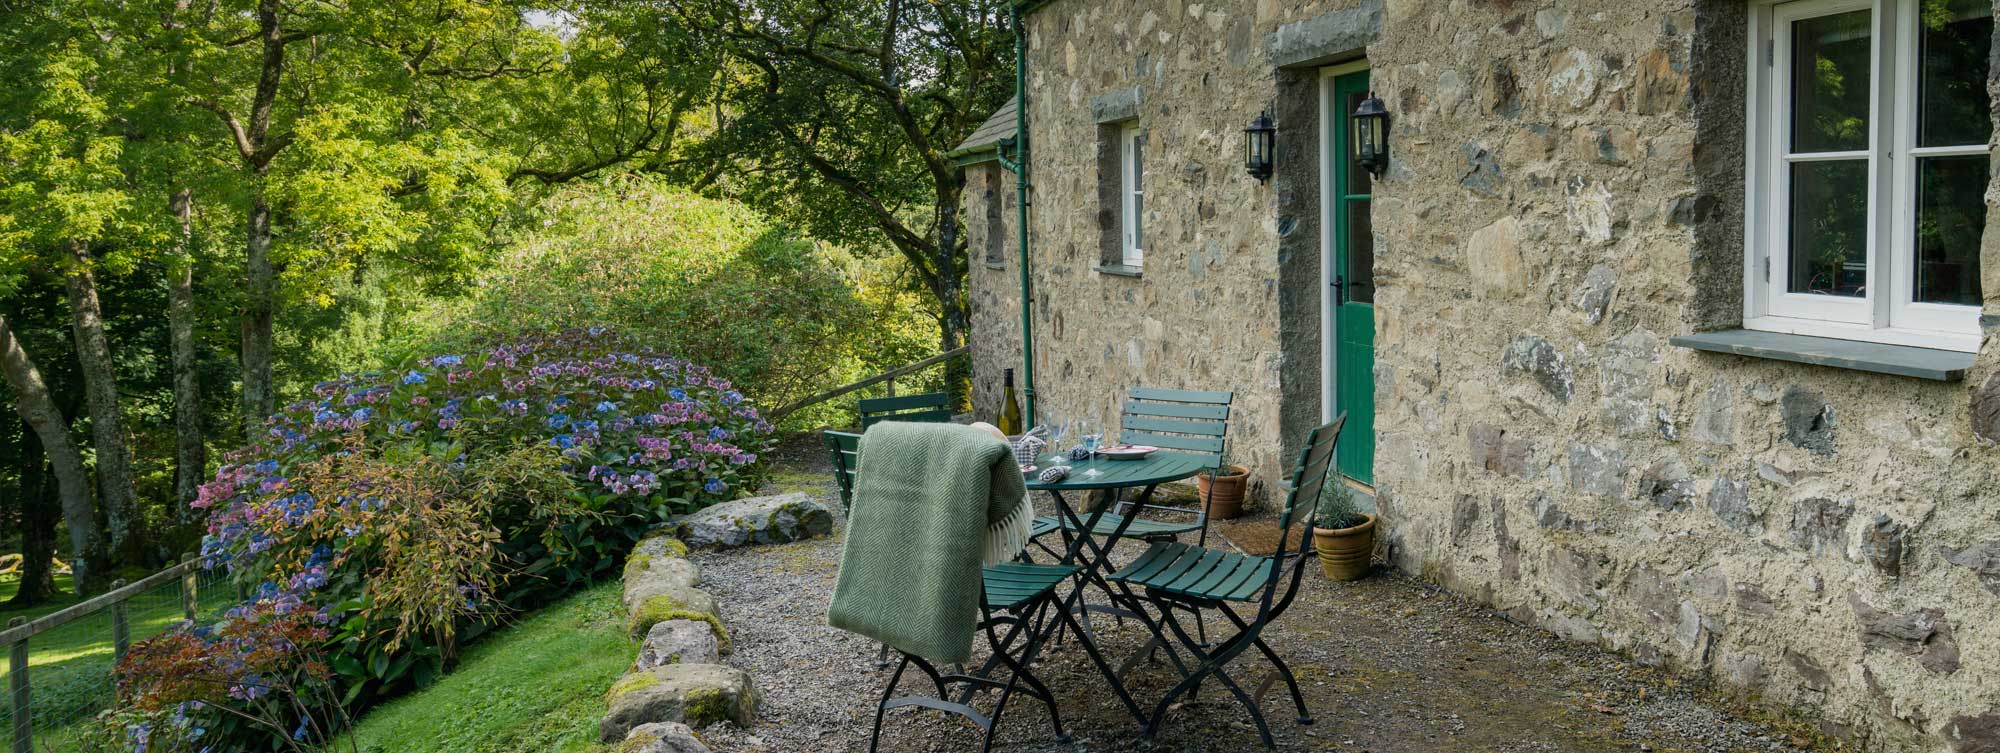 holiday cottages in the Channel Islands 